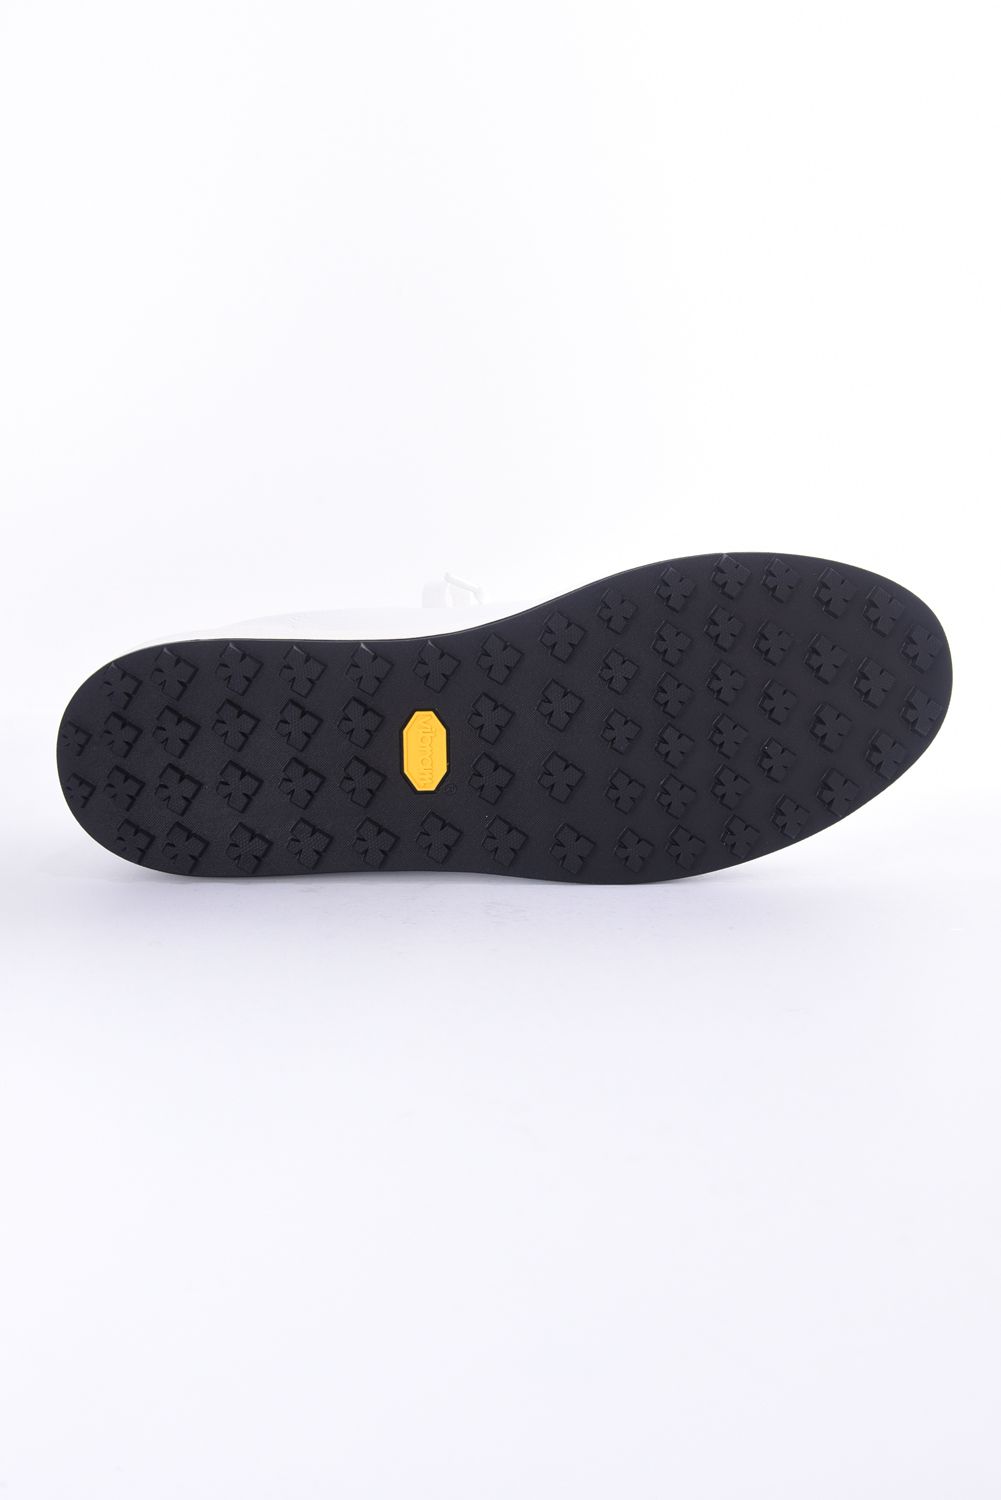 LUXEAKMPLUS - LUXE VIBRAM GOLF SHOES / レインボーロゴ 